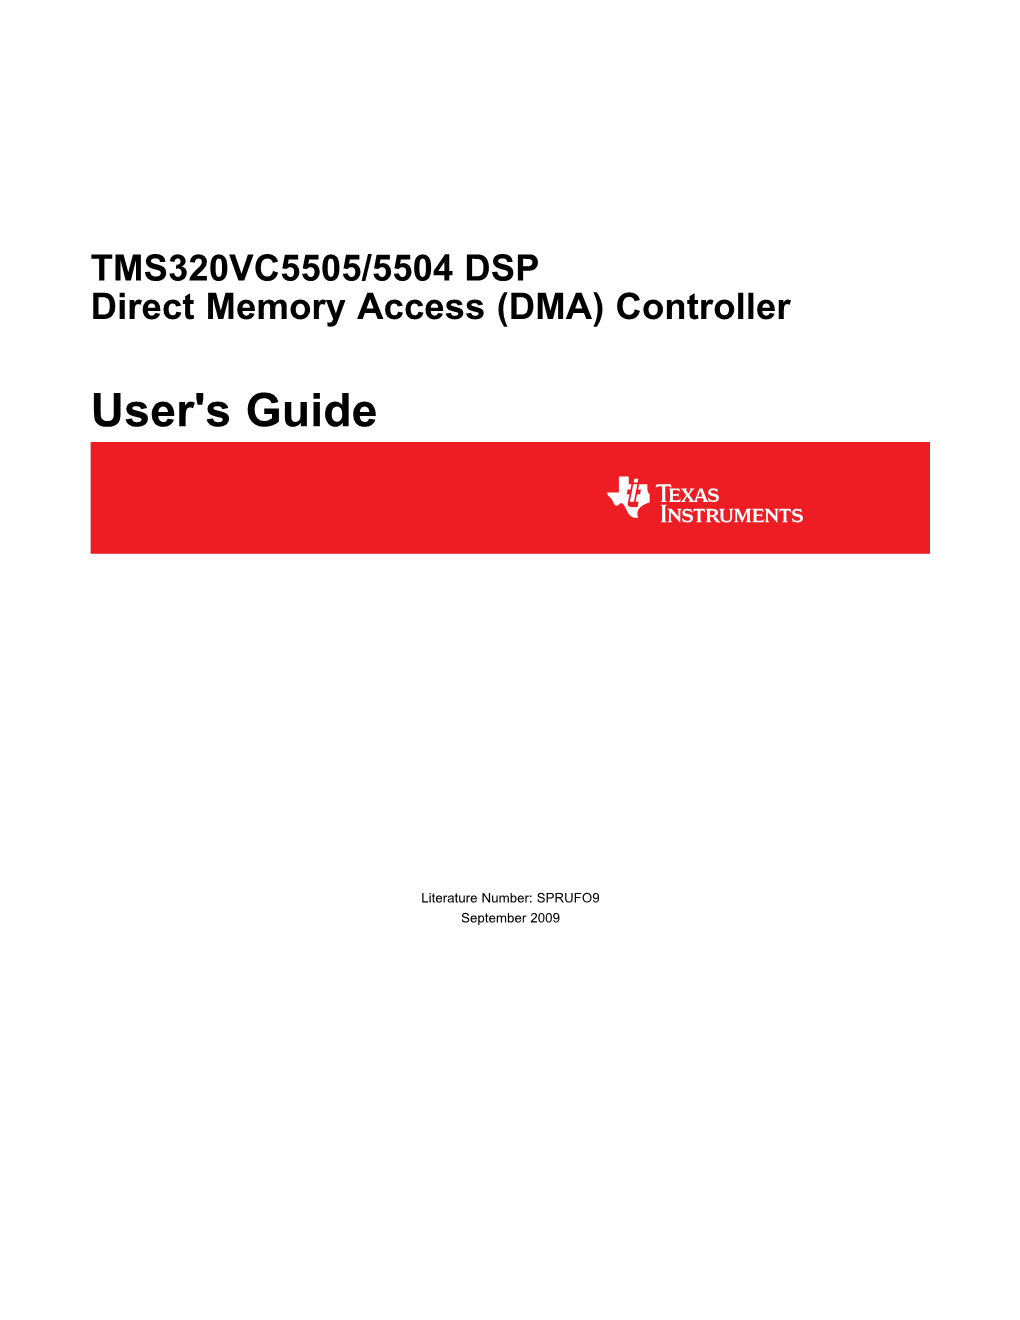 TMS320VC5505/5504 DSP Direct Memory Access (DMA) Controller